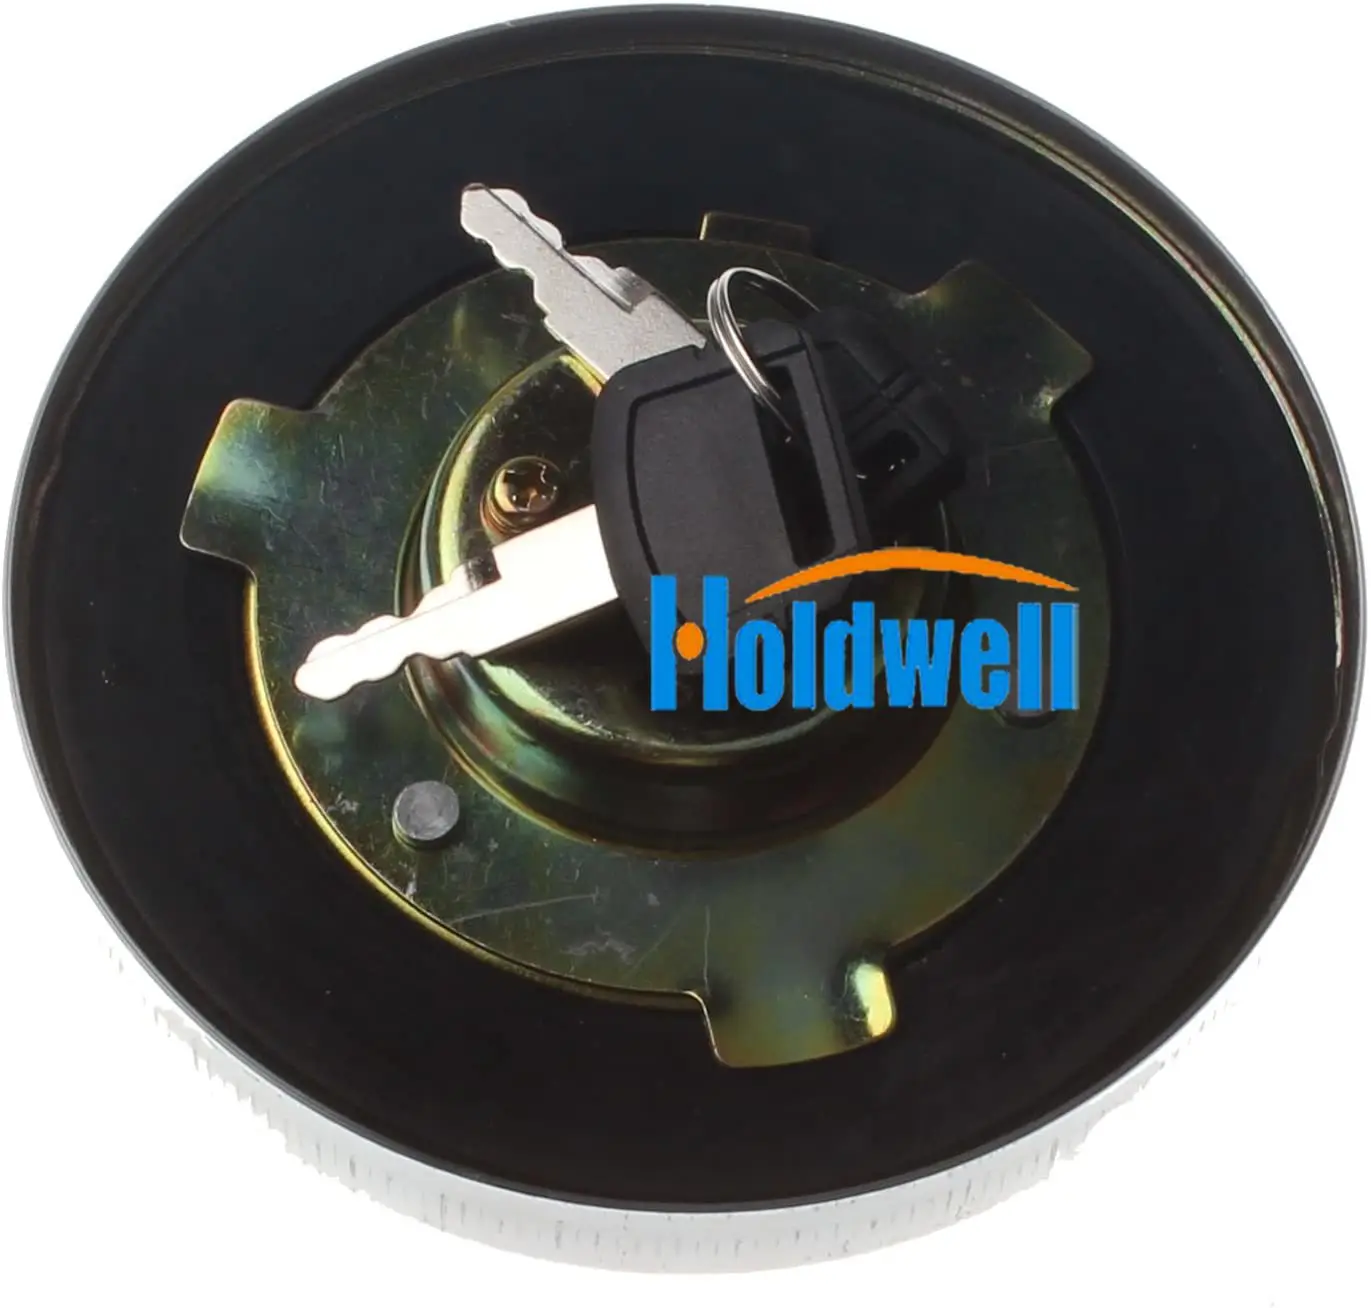 

Holdwell Fuel Tank Cap W/2 Key for John Deere 200LC 330LC 370 2054 Logger Components